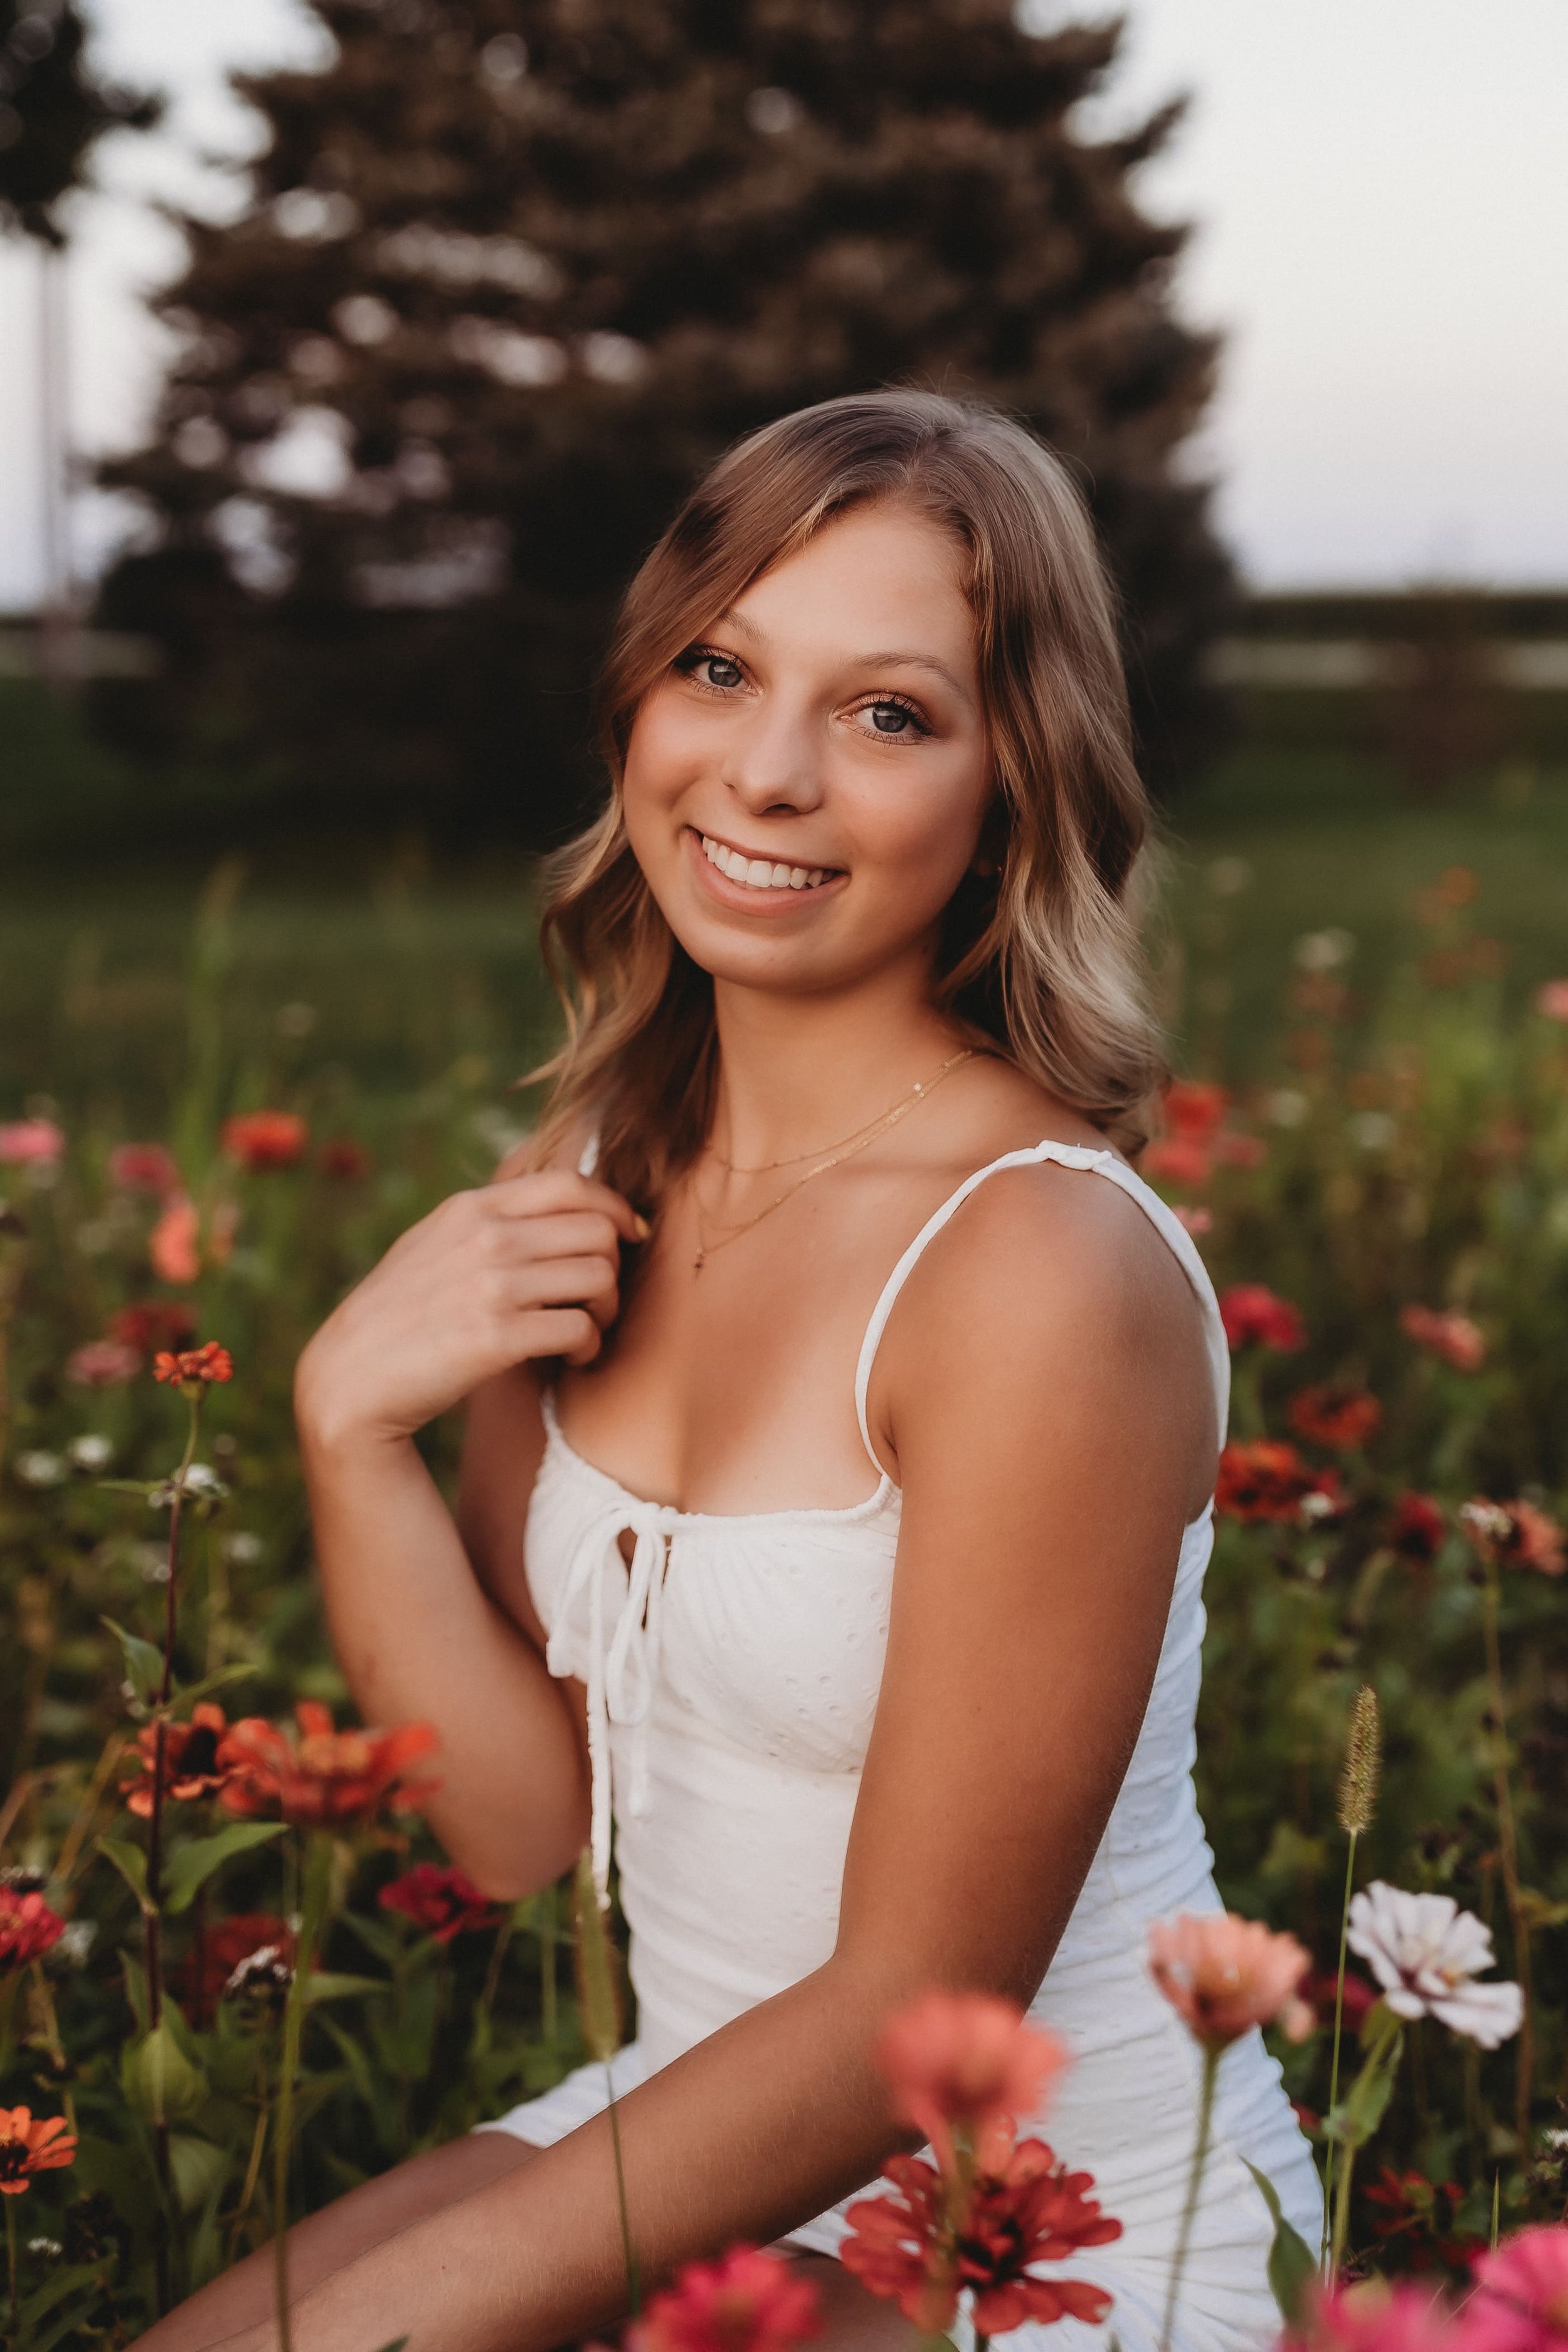  a senior photographer near me took this portrait of a young woman in a flower field with one hand on her knee and the other at her collarbone touching her hair 